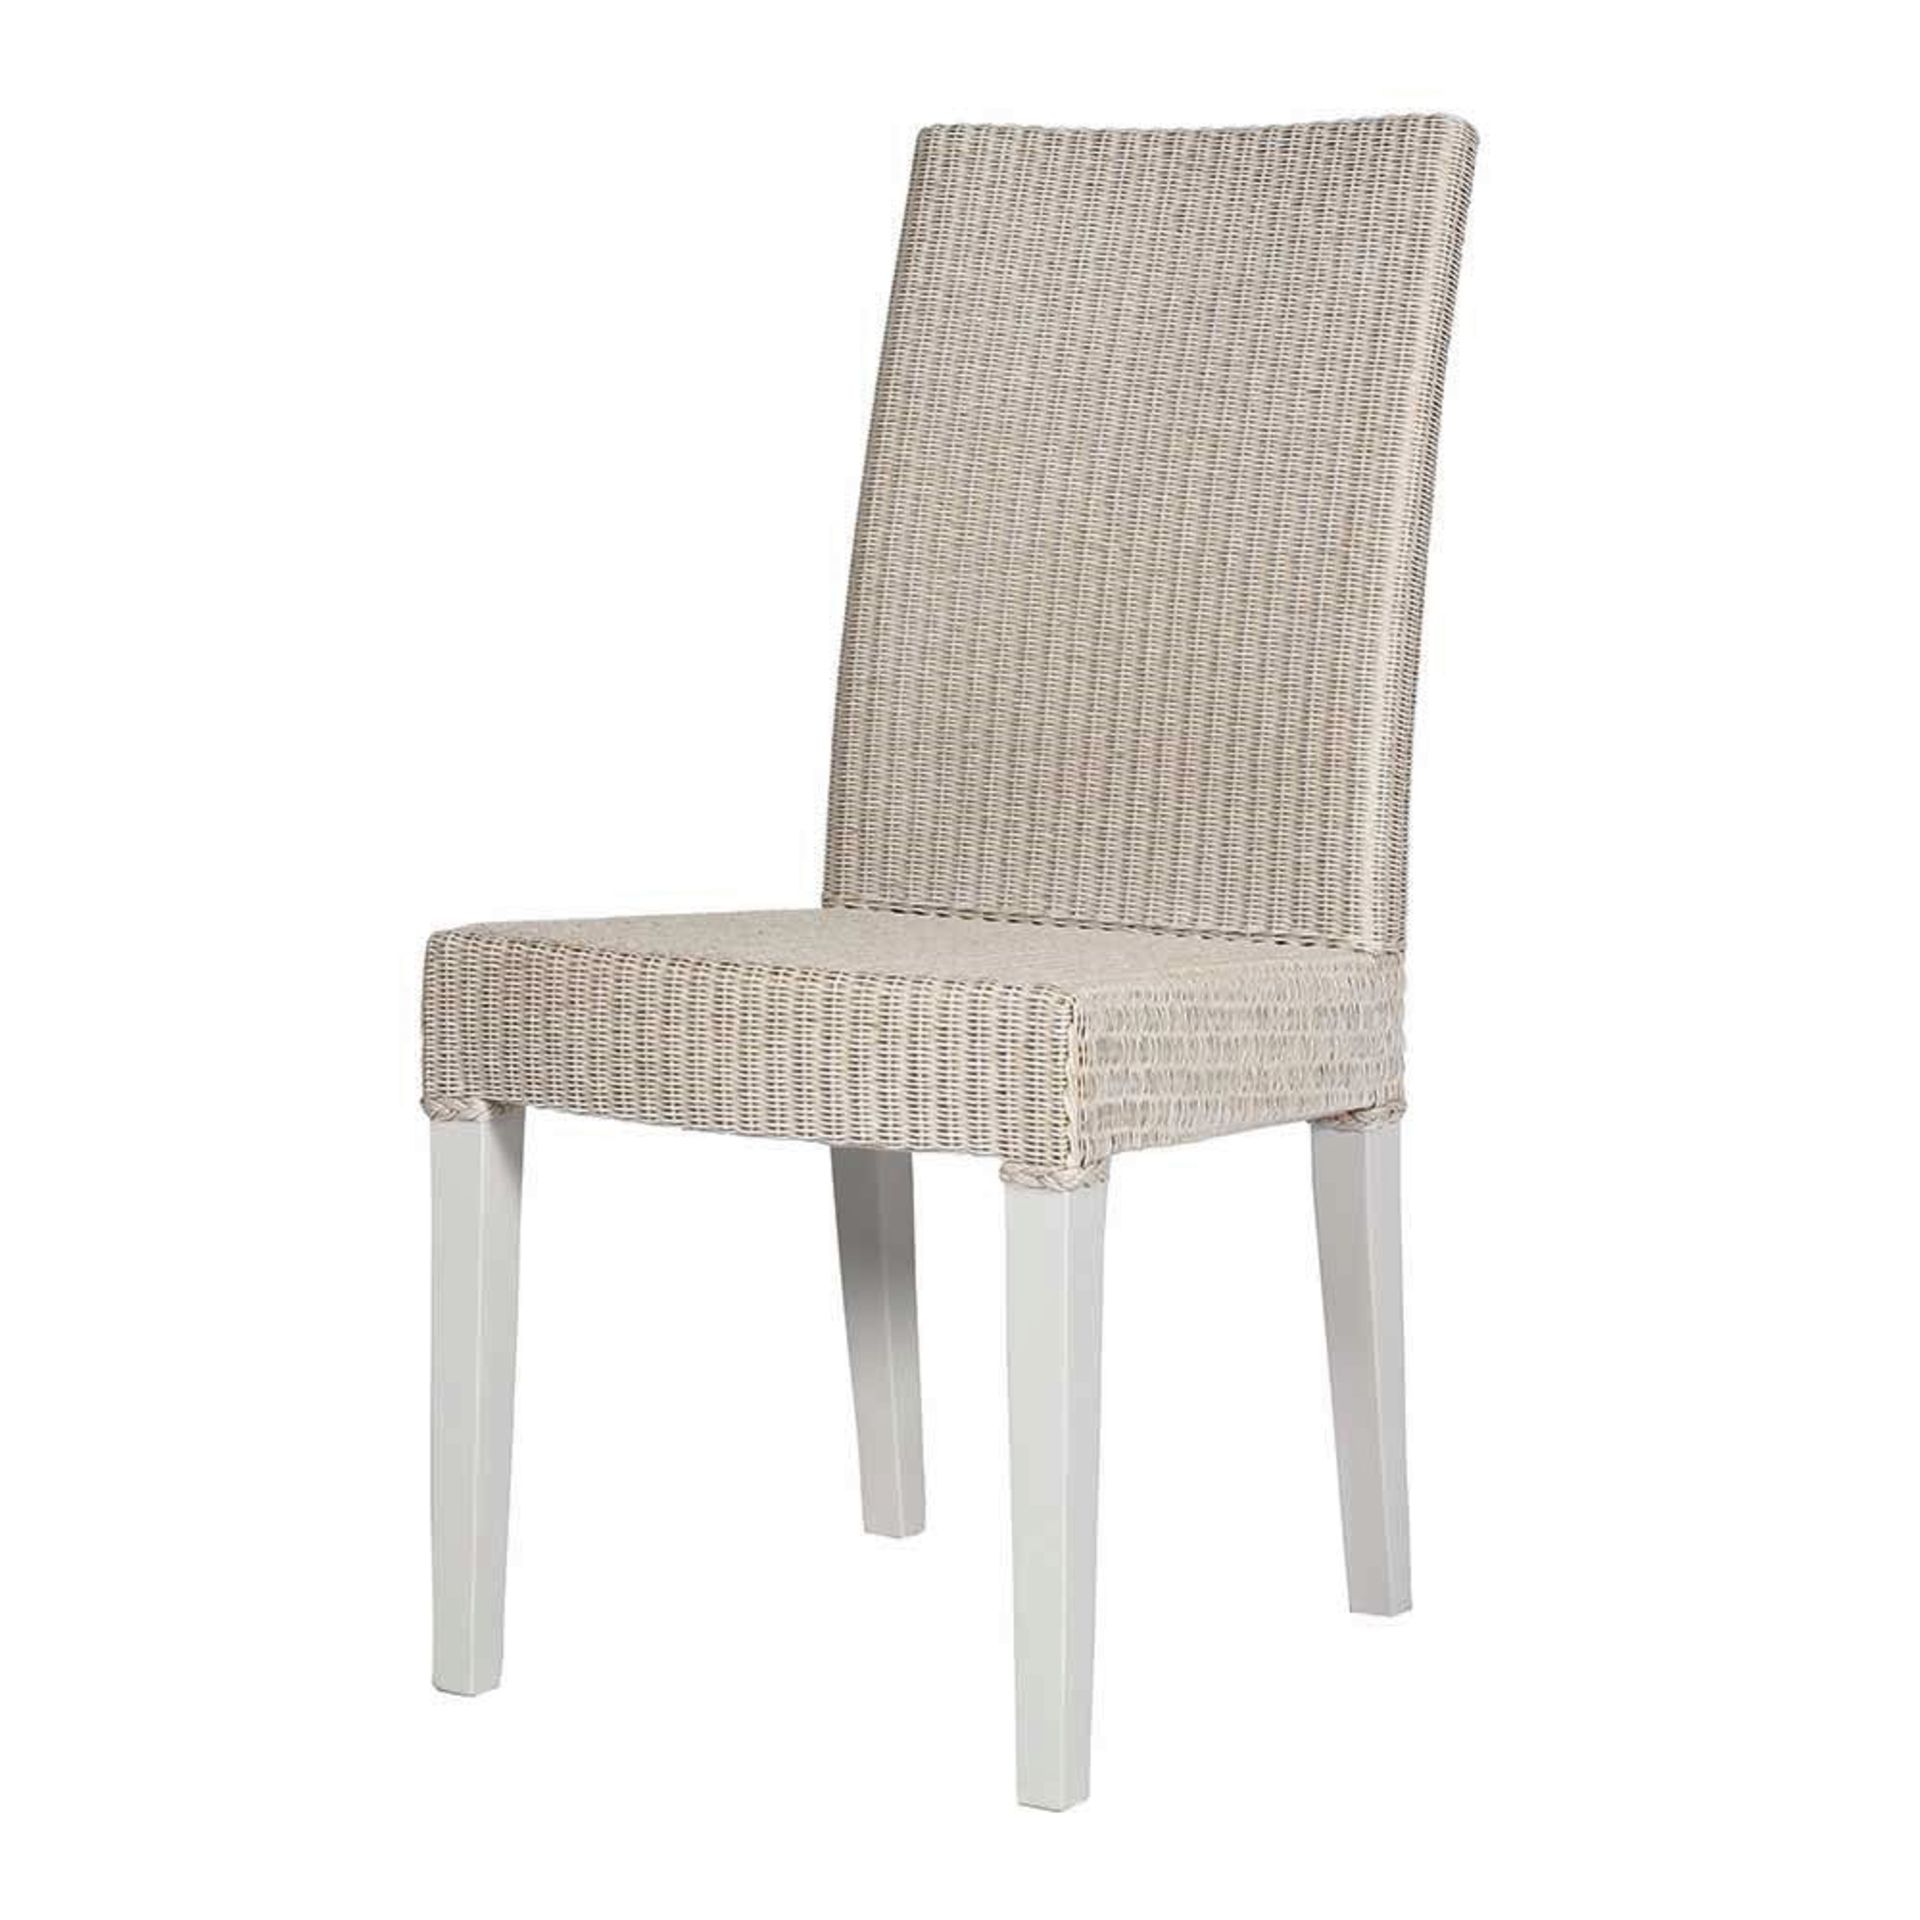 4 x Lina Two Tone Lloyd Loom Woven Dining Chairs - Contemporary Dining Chair Set - RRP £792! - Image 3 of 7